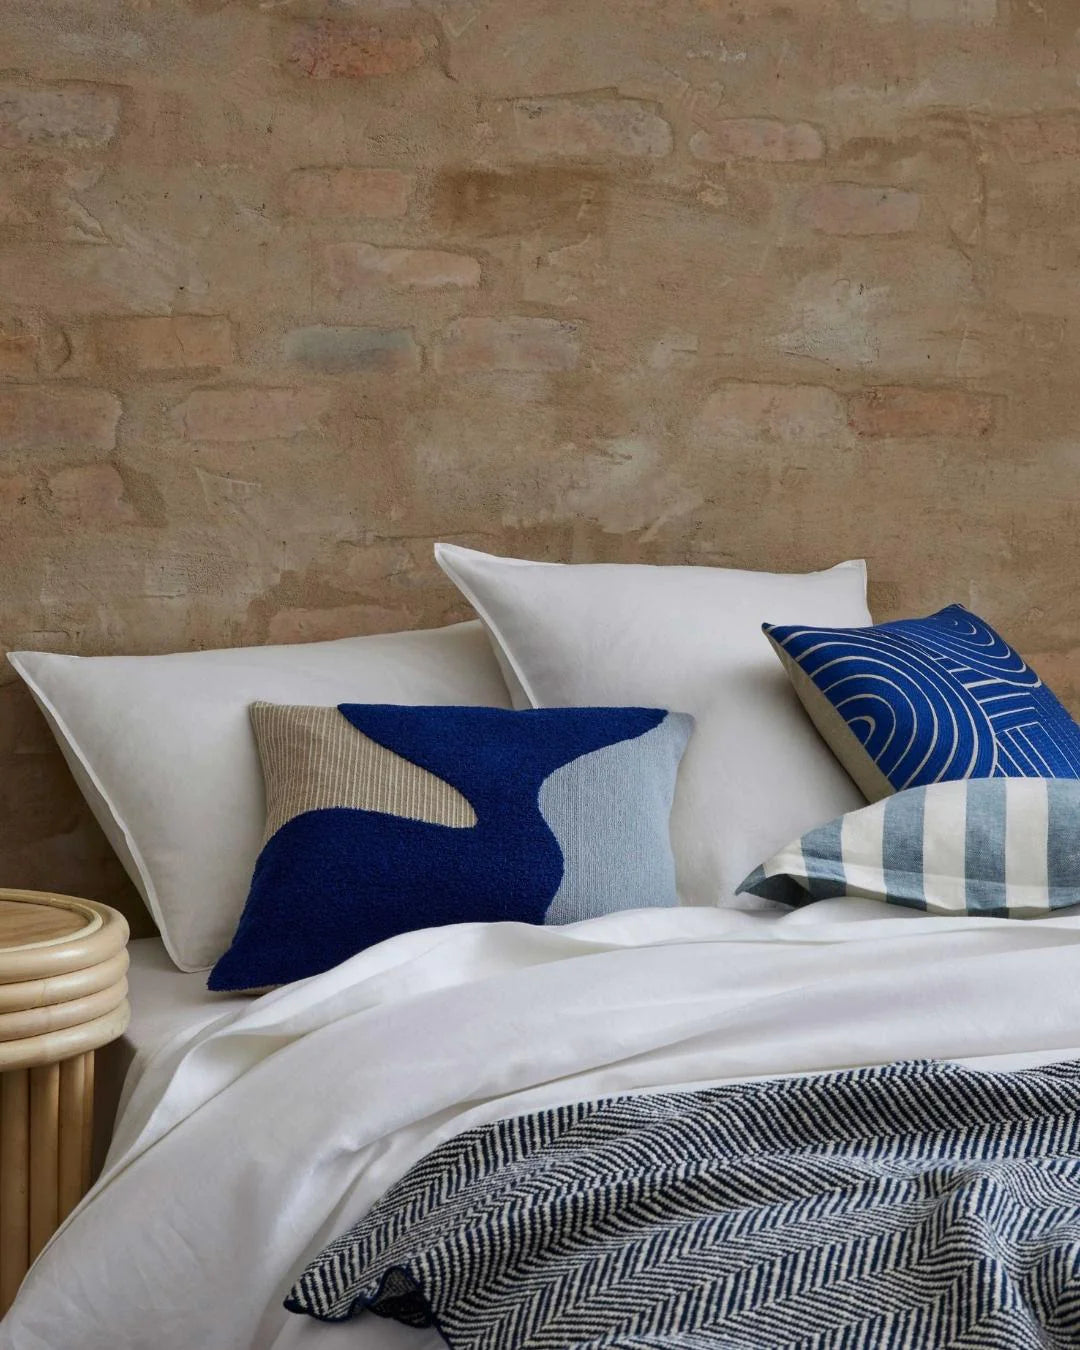 Take a look at our selection of pillowcases and pillow slips, designed to provide you with exceptional comfort during your sleep. We offer a variety of materials to choose from, such as linen, cotton, bamboo, and pure silk.